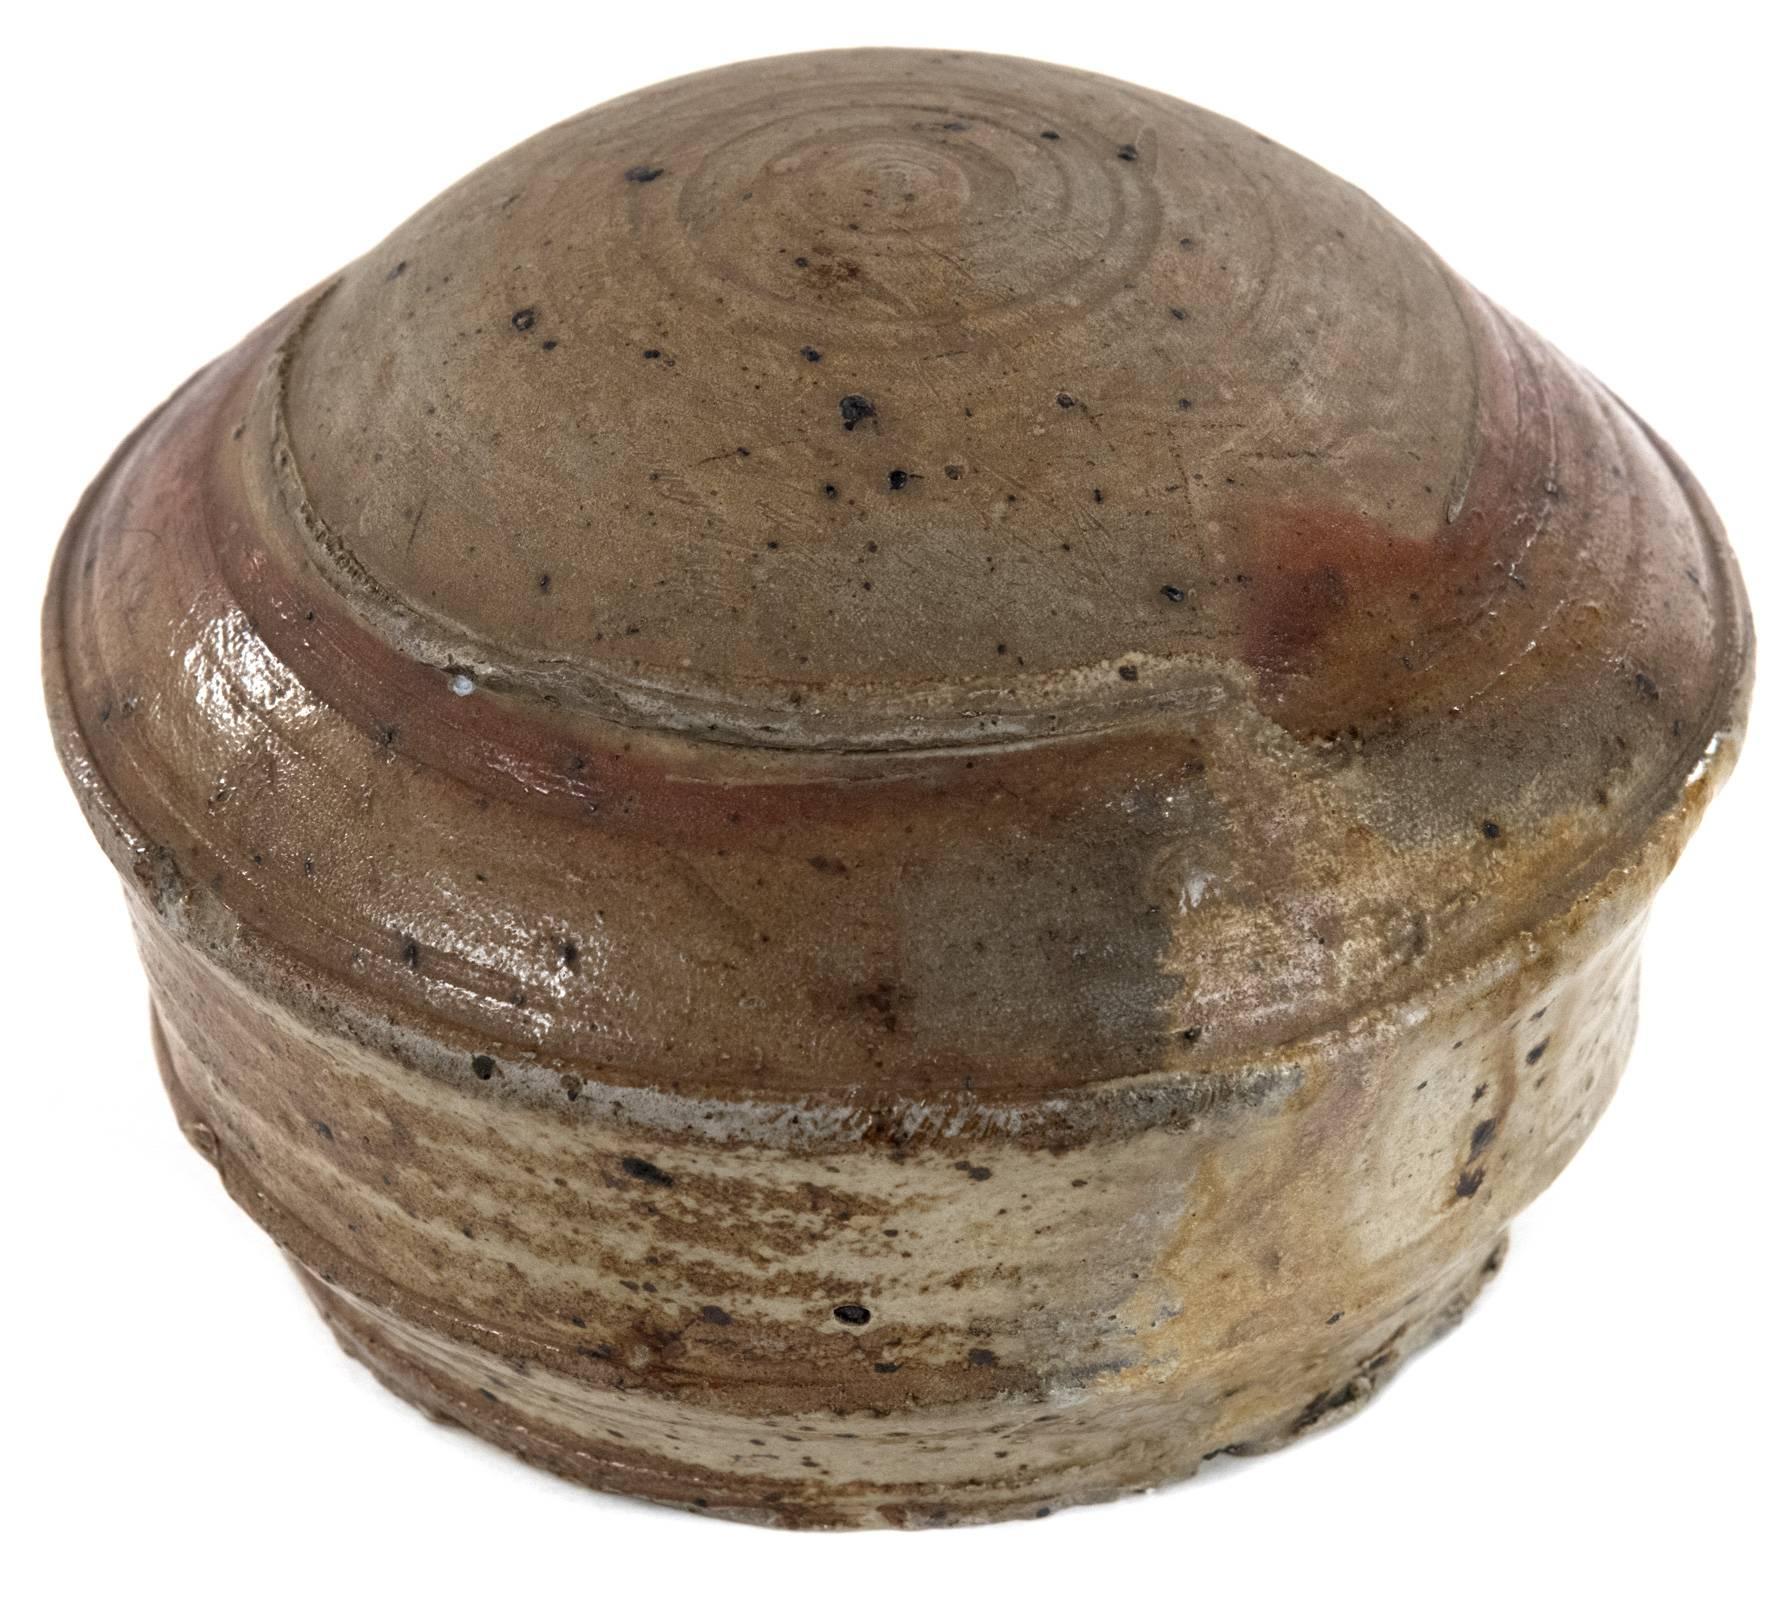 A 19th century earthenware salt celler decorated with a salt glaze, the round, domed top, reminiscent of a turtle shell, above a tapering body with a strong handle. Measures: 5 ½ x 9 x 10 inches.